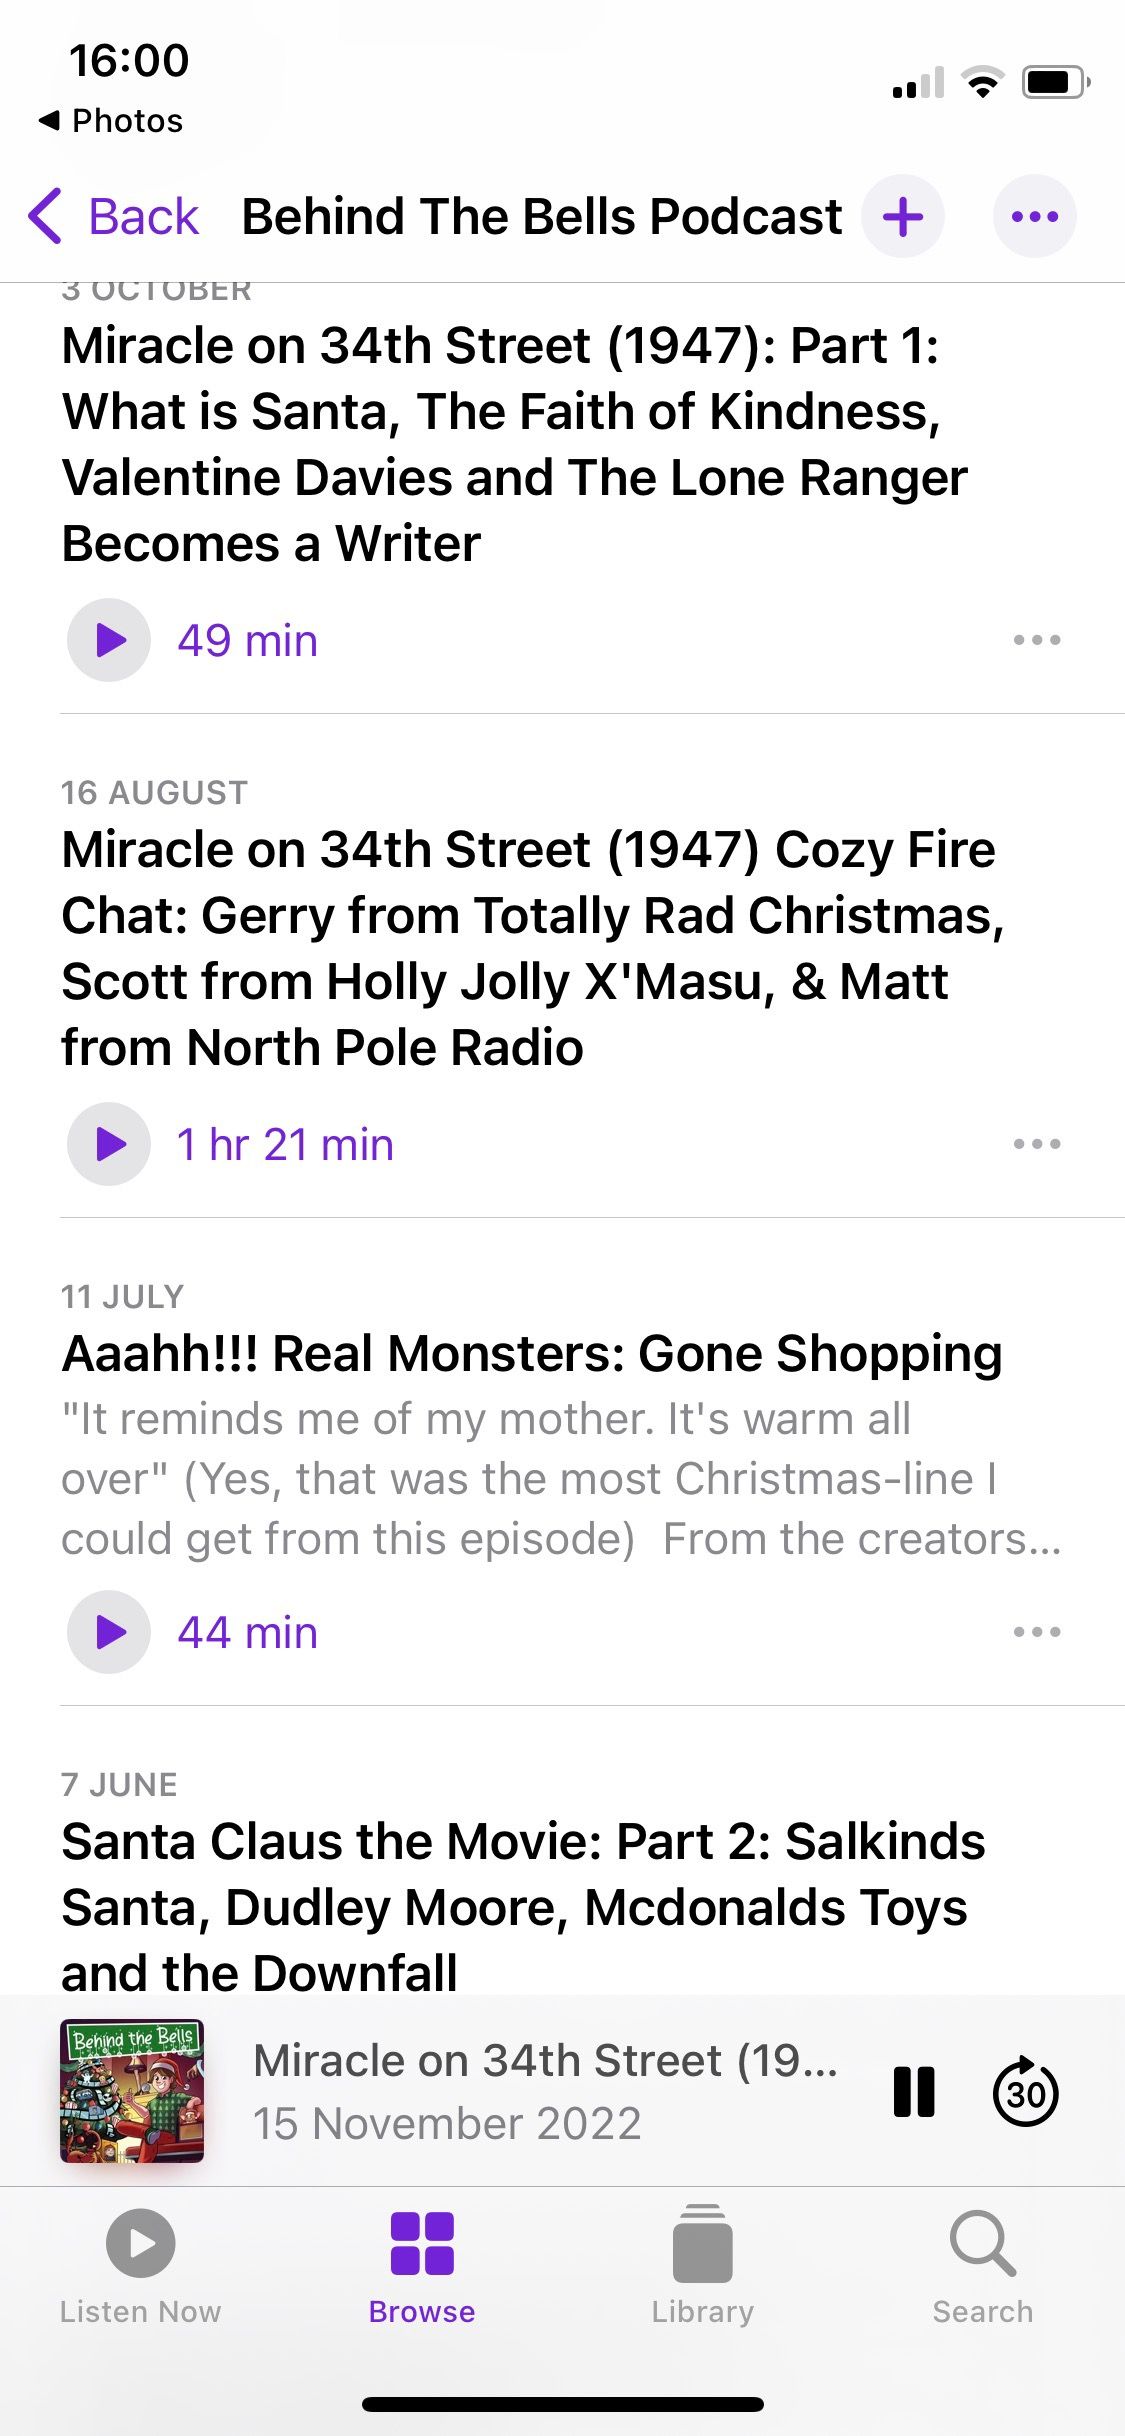 Screenshot of the Behind the Bells podcast showing the episode list